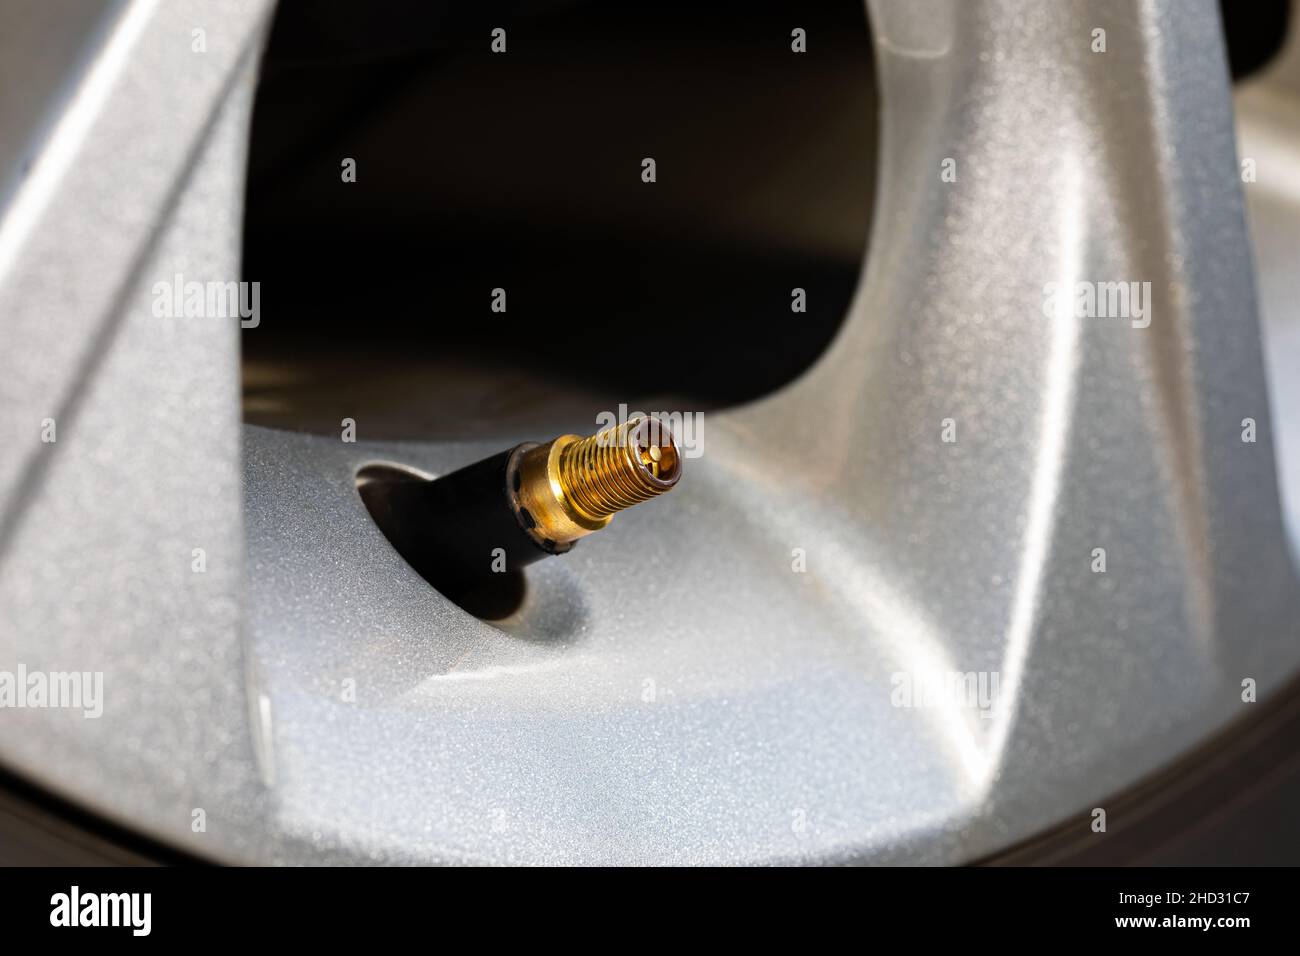 Tire valve stem on car wheel. Vehicle safety, tire wear, fuel mileage and winter checkup concept. Stock Photo